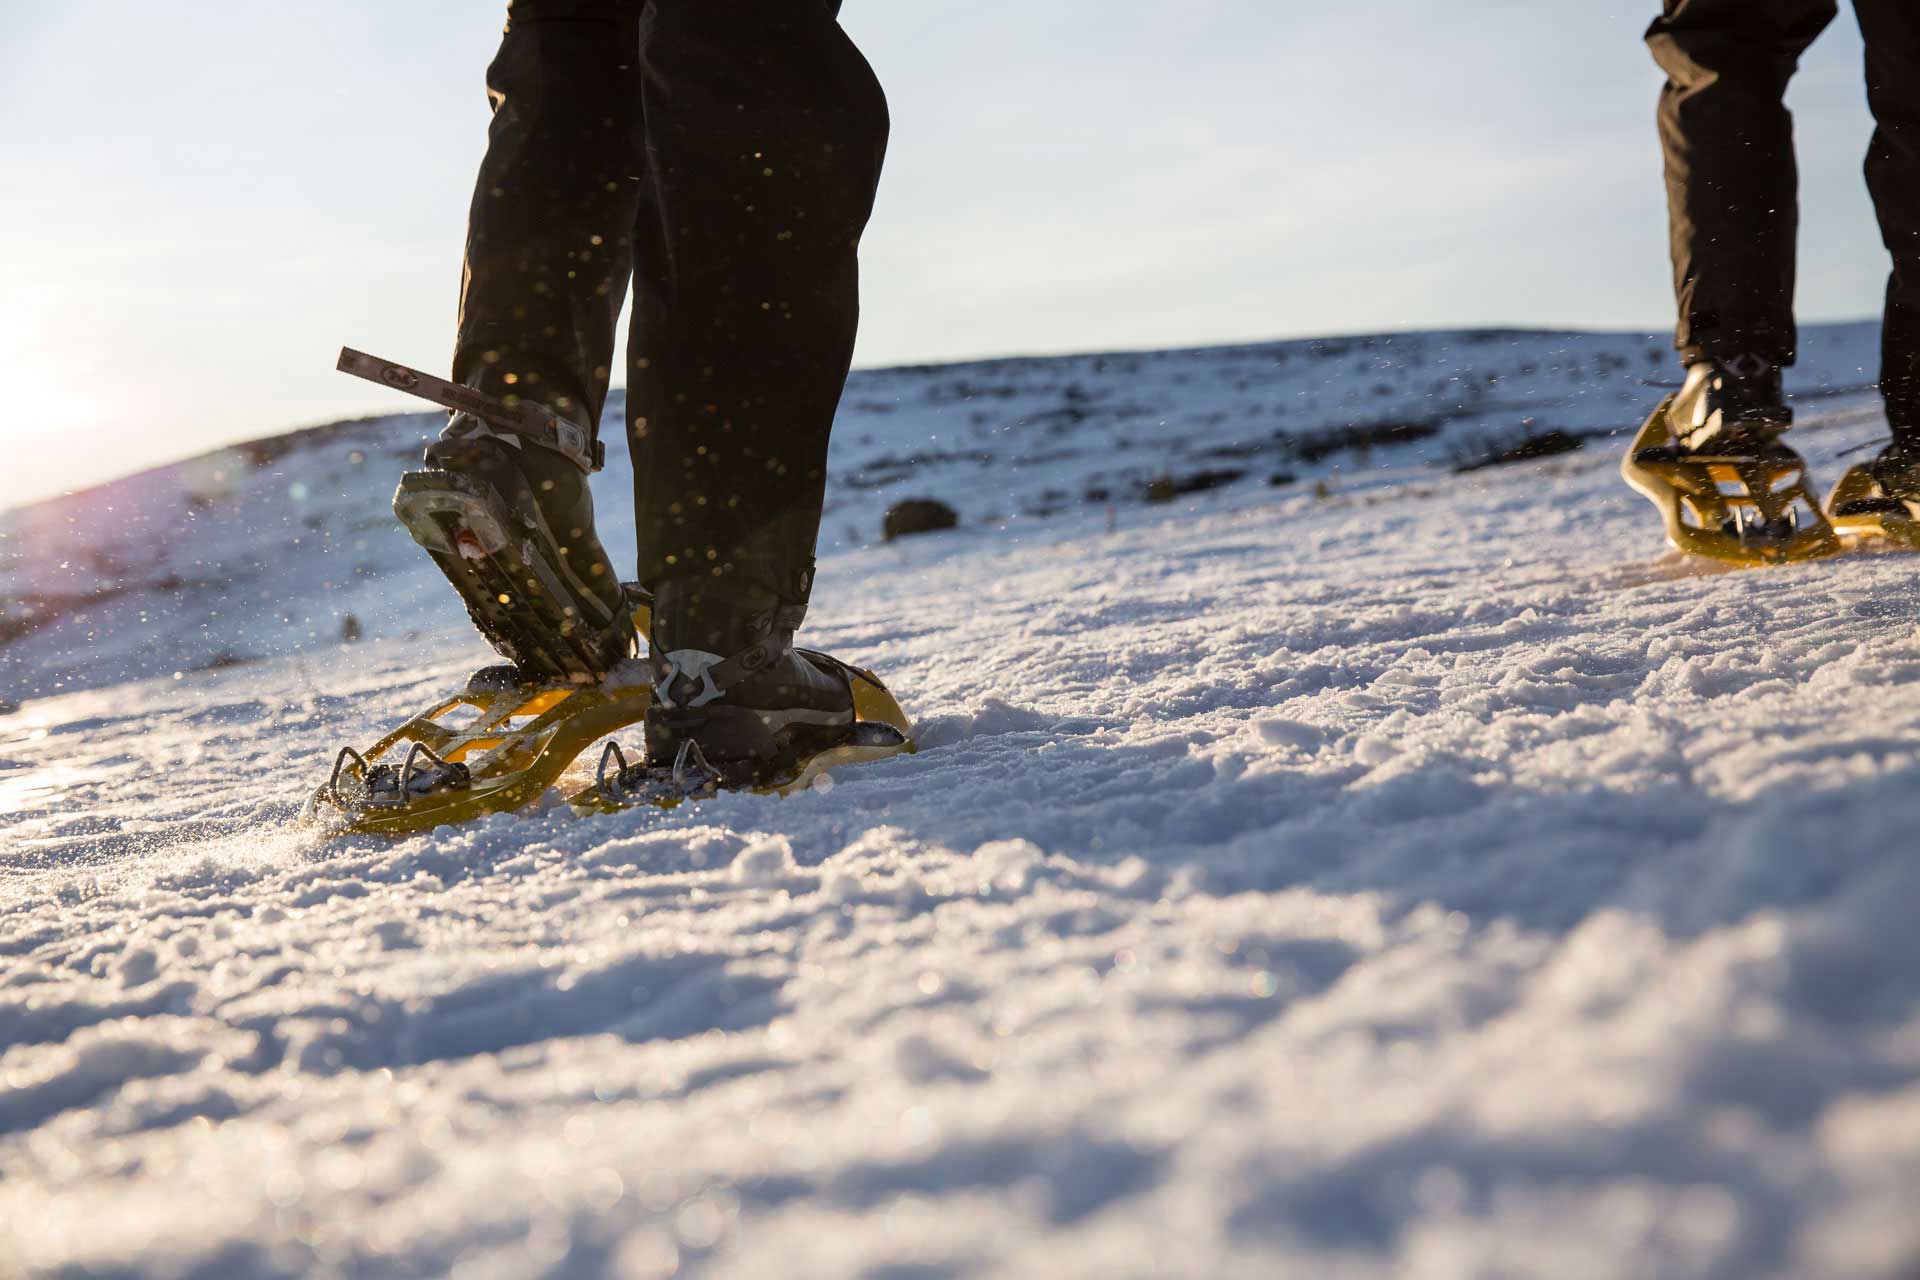 Snowshoe hike | Photo: Anette Andersson